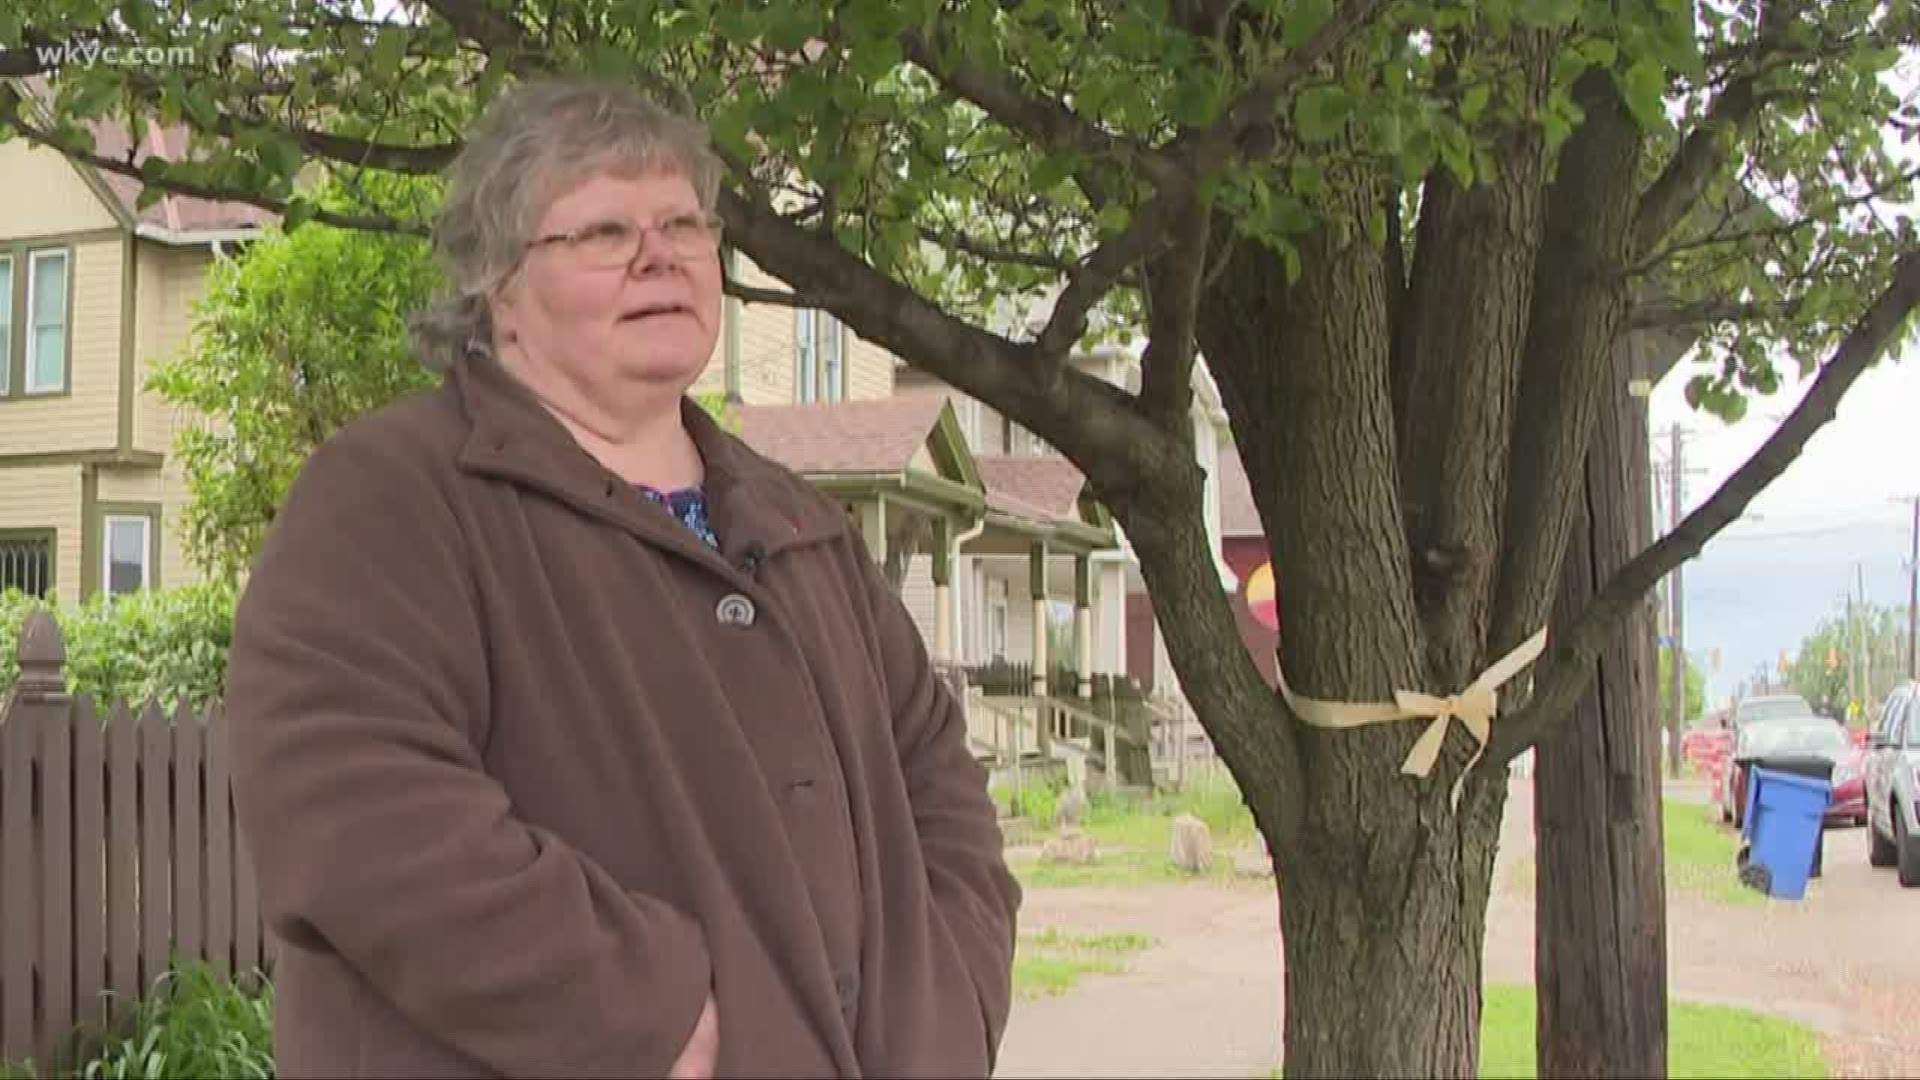 A Tremont woman says she will tie herself to a tree in front of her house before she lets the city cut it down. Tammy Layton, who lives on Clark Avenue, says she planted the tree nearly 20 years ago in honor of her parents.